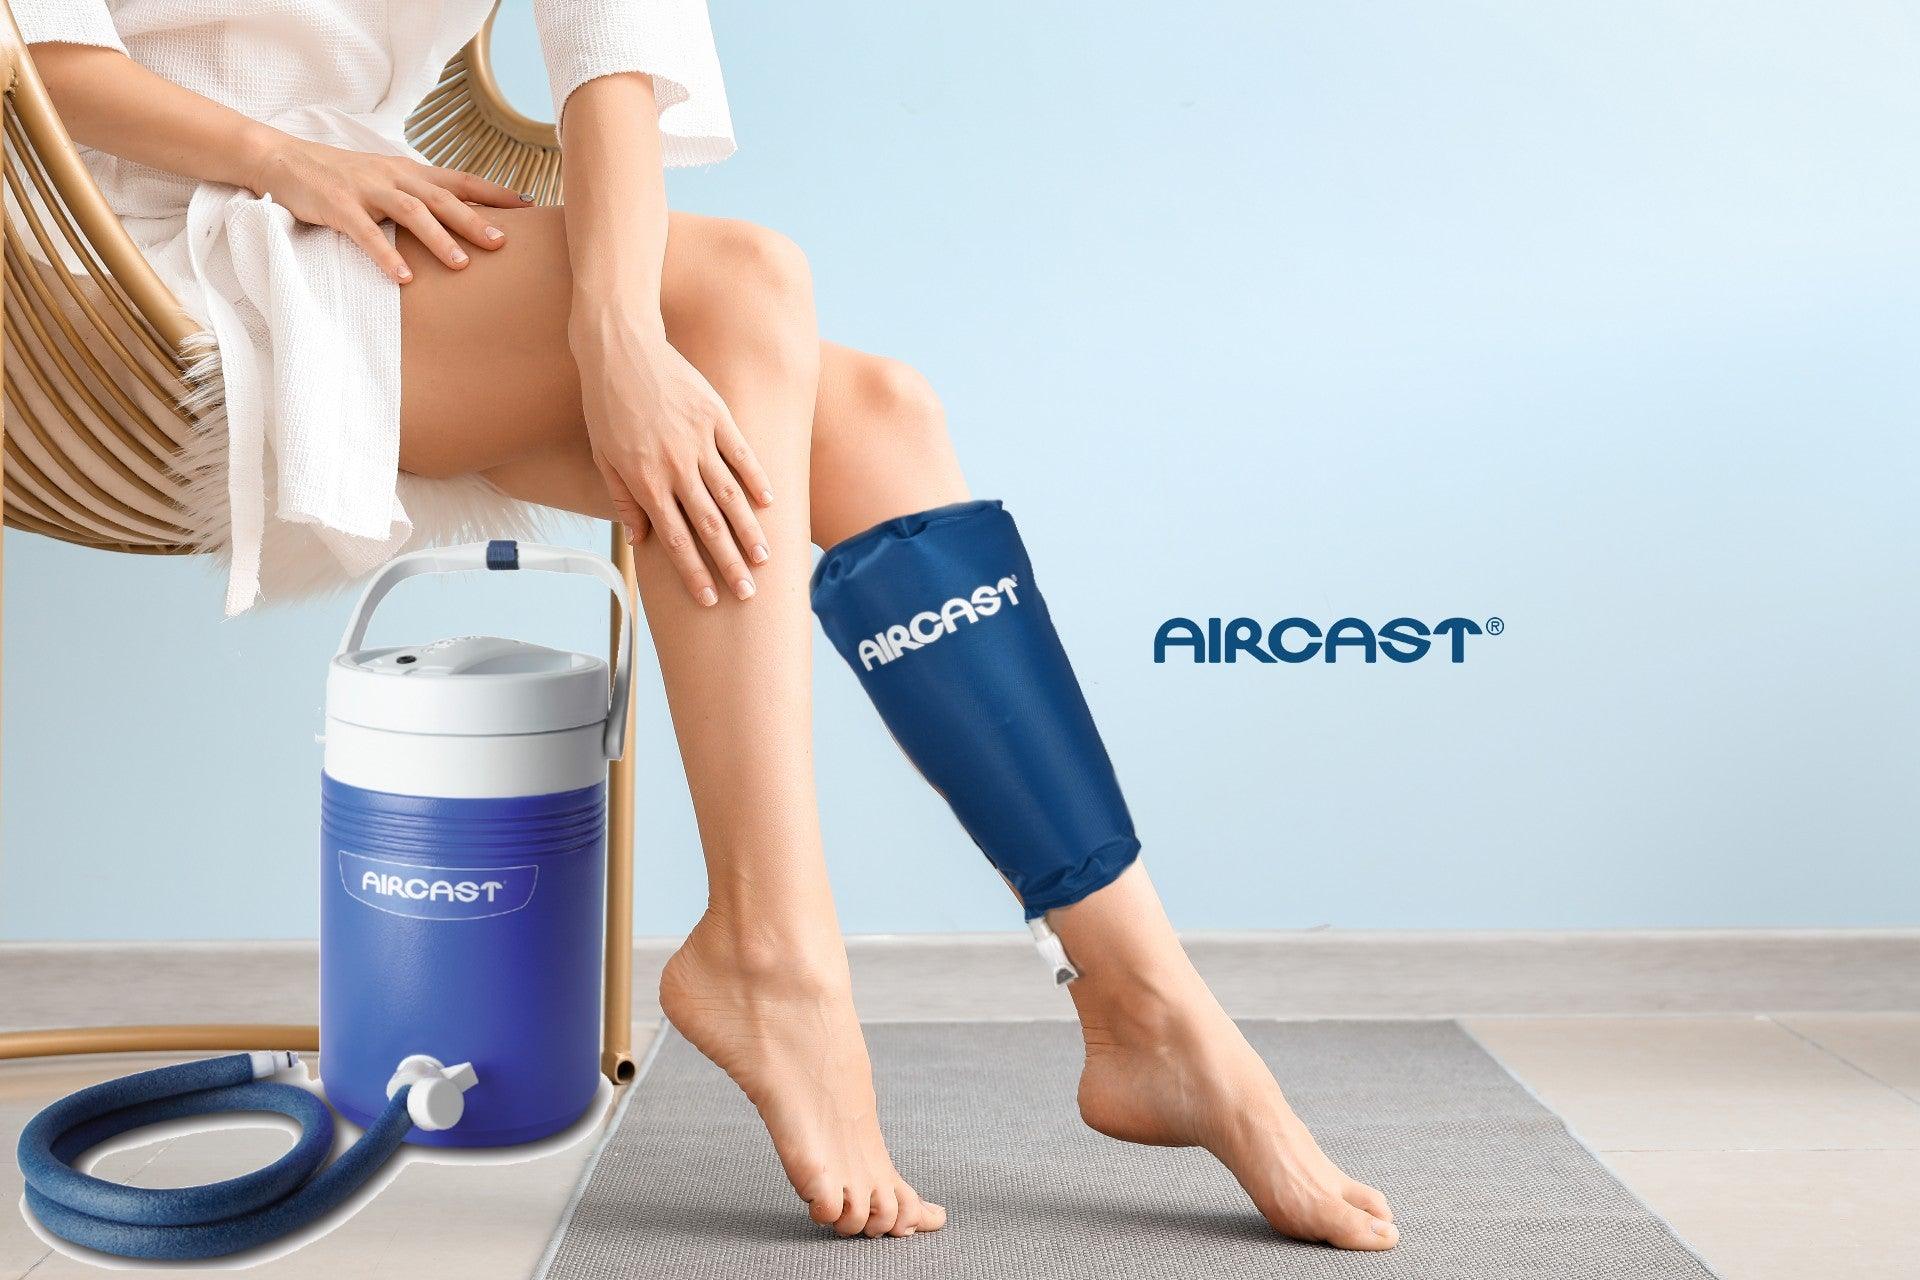 Aircast® Ankle Bracing images by Supply Physical Therapy